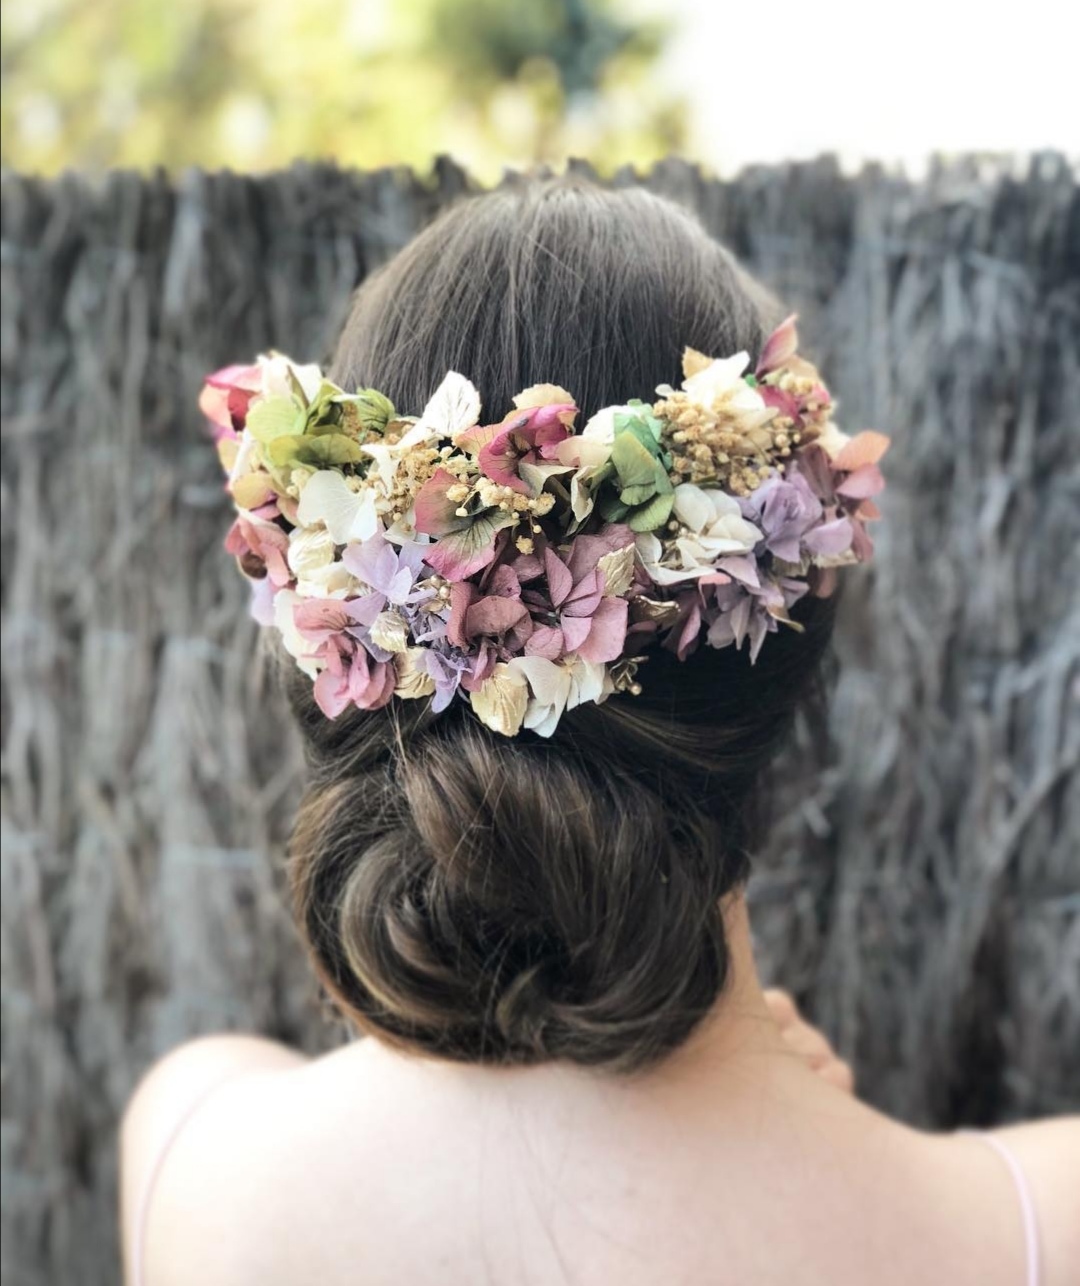 Bridal updo with flowers